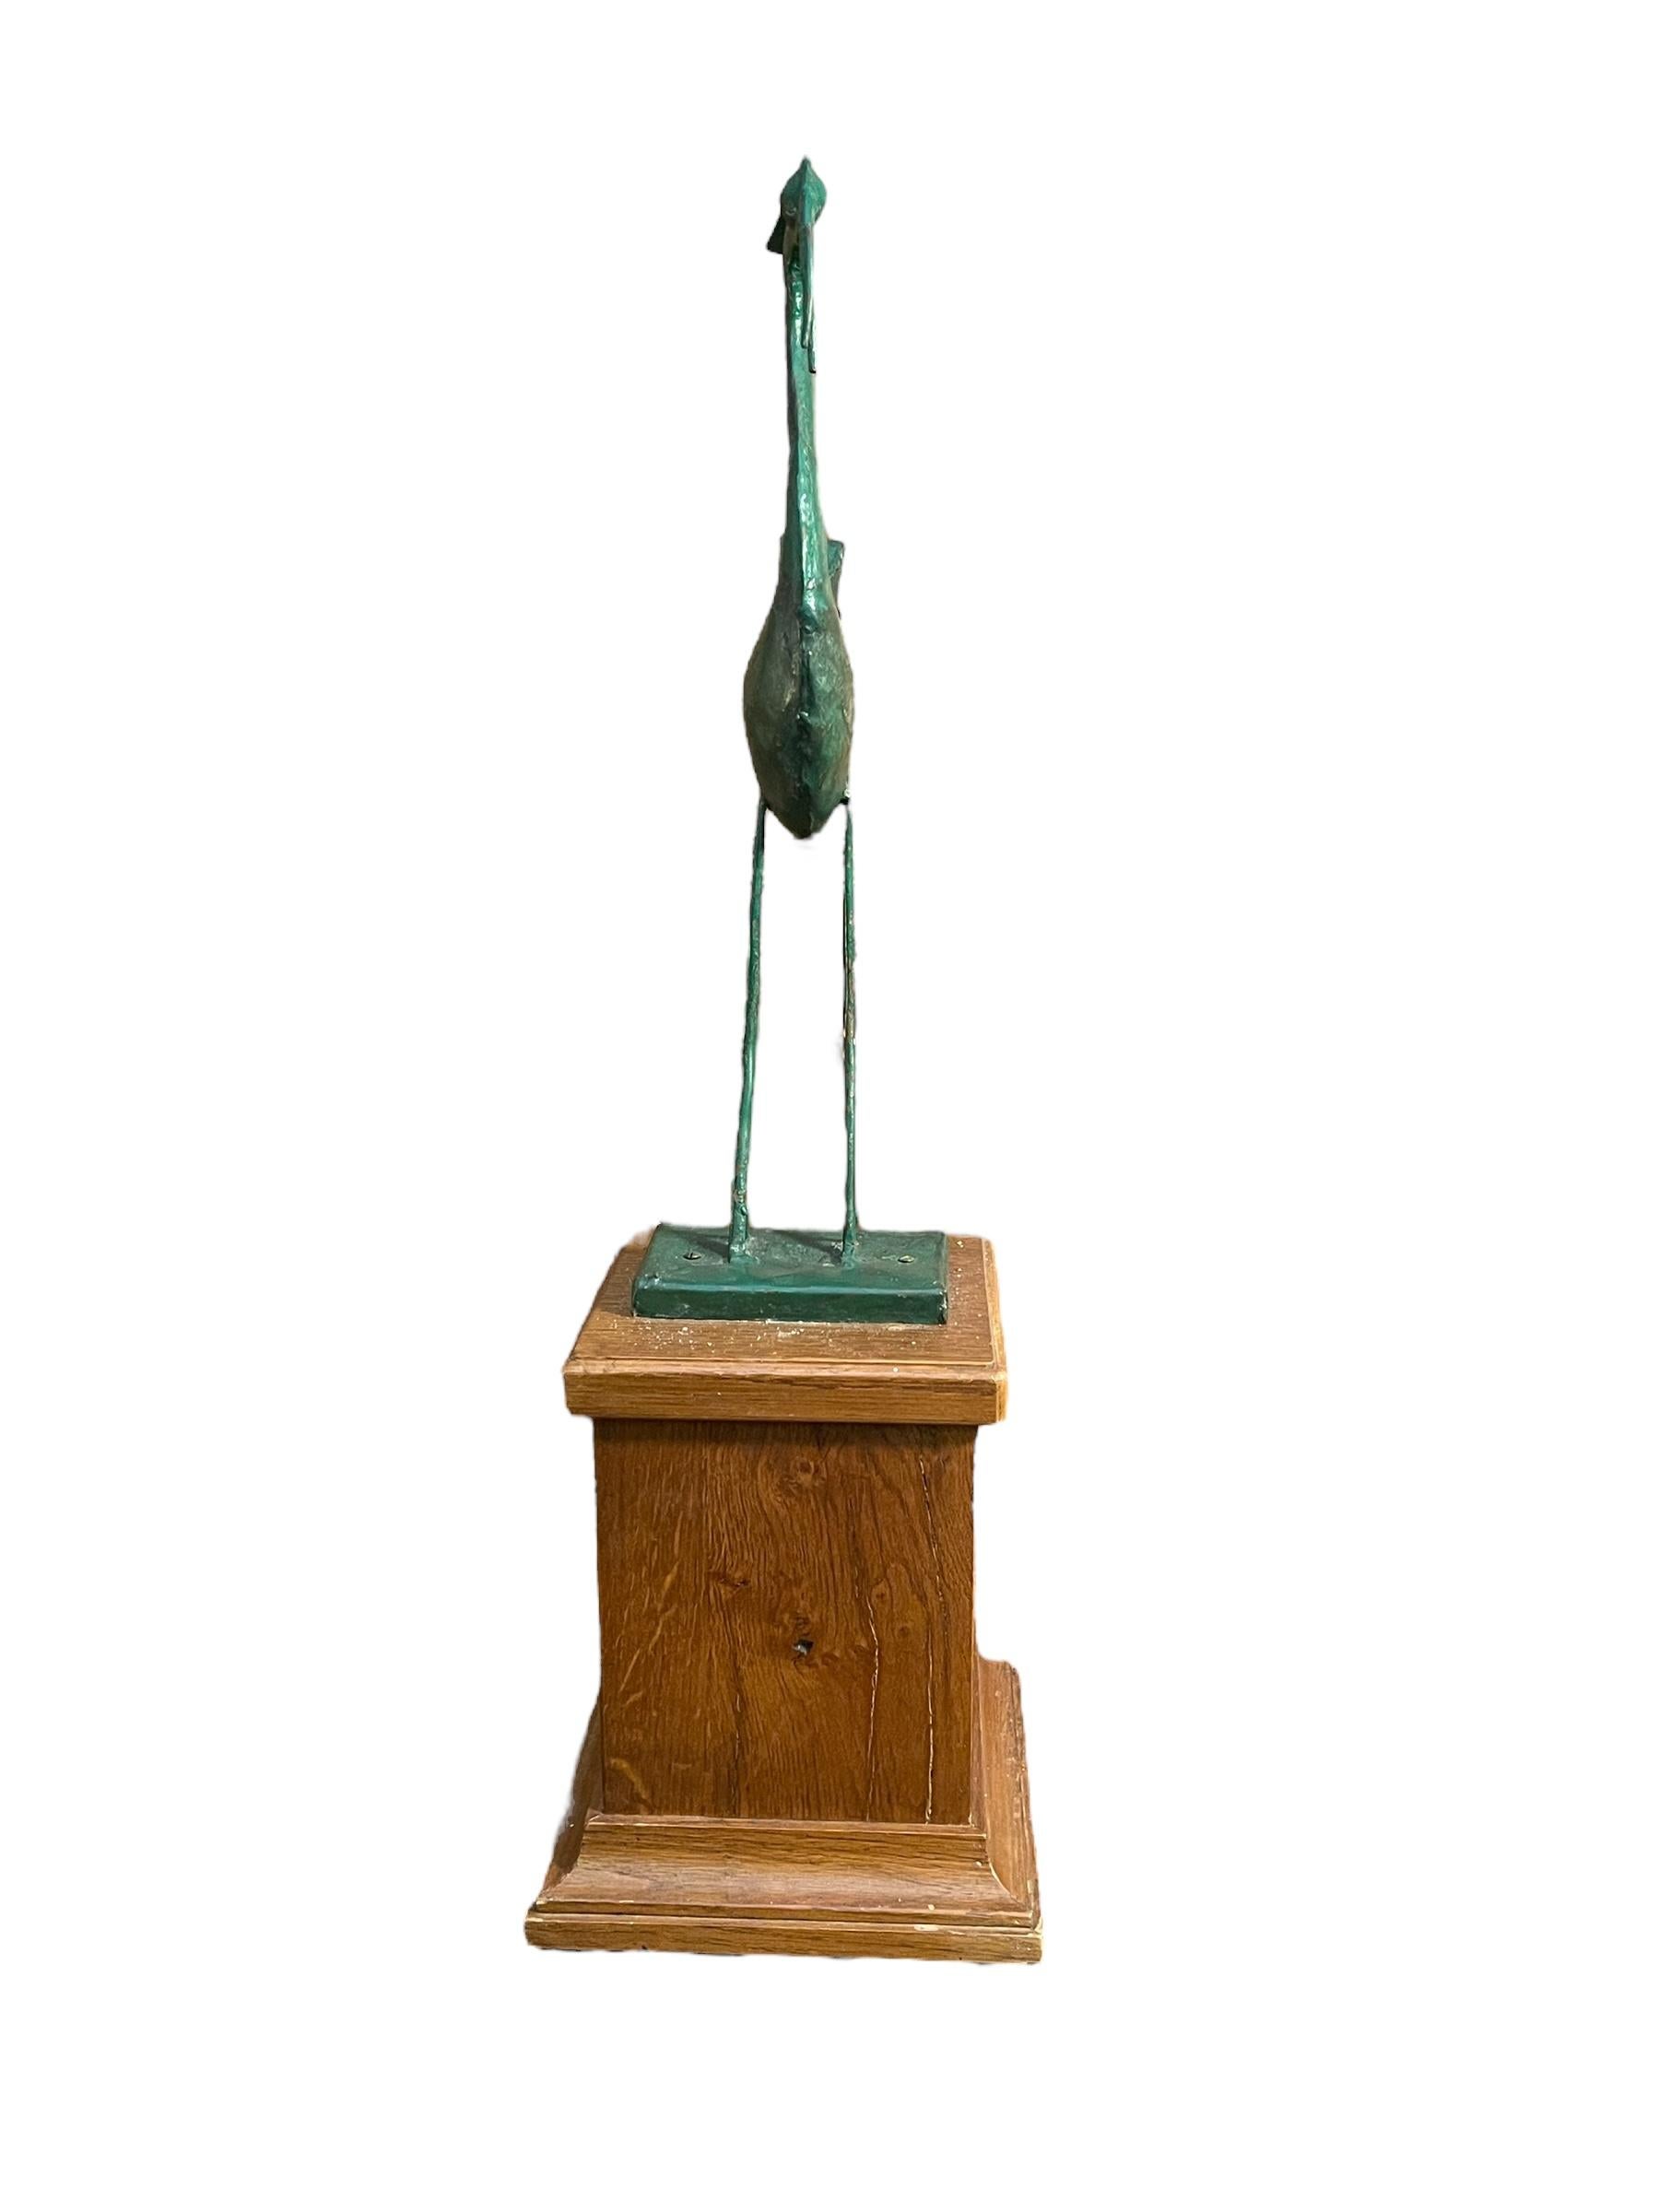 Metal sculpture, heron, 20th century
Sculpture depicting a bird, heron, in green lacquered metal, on a wooden pedestal.
Good condition, as shown in the photo
Maximum overall dimensions without pedestal: 30x14 cm, height 49 cm
Maximum overall